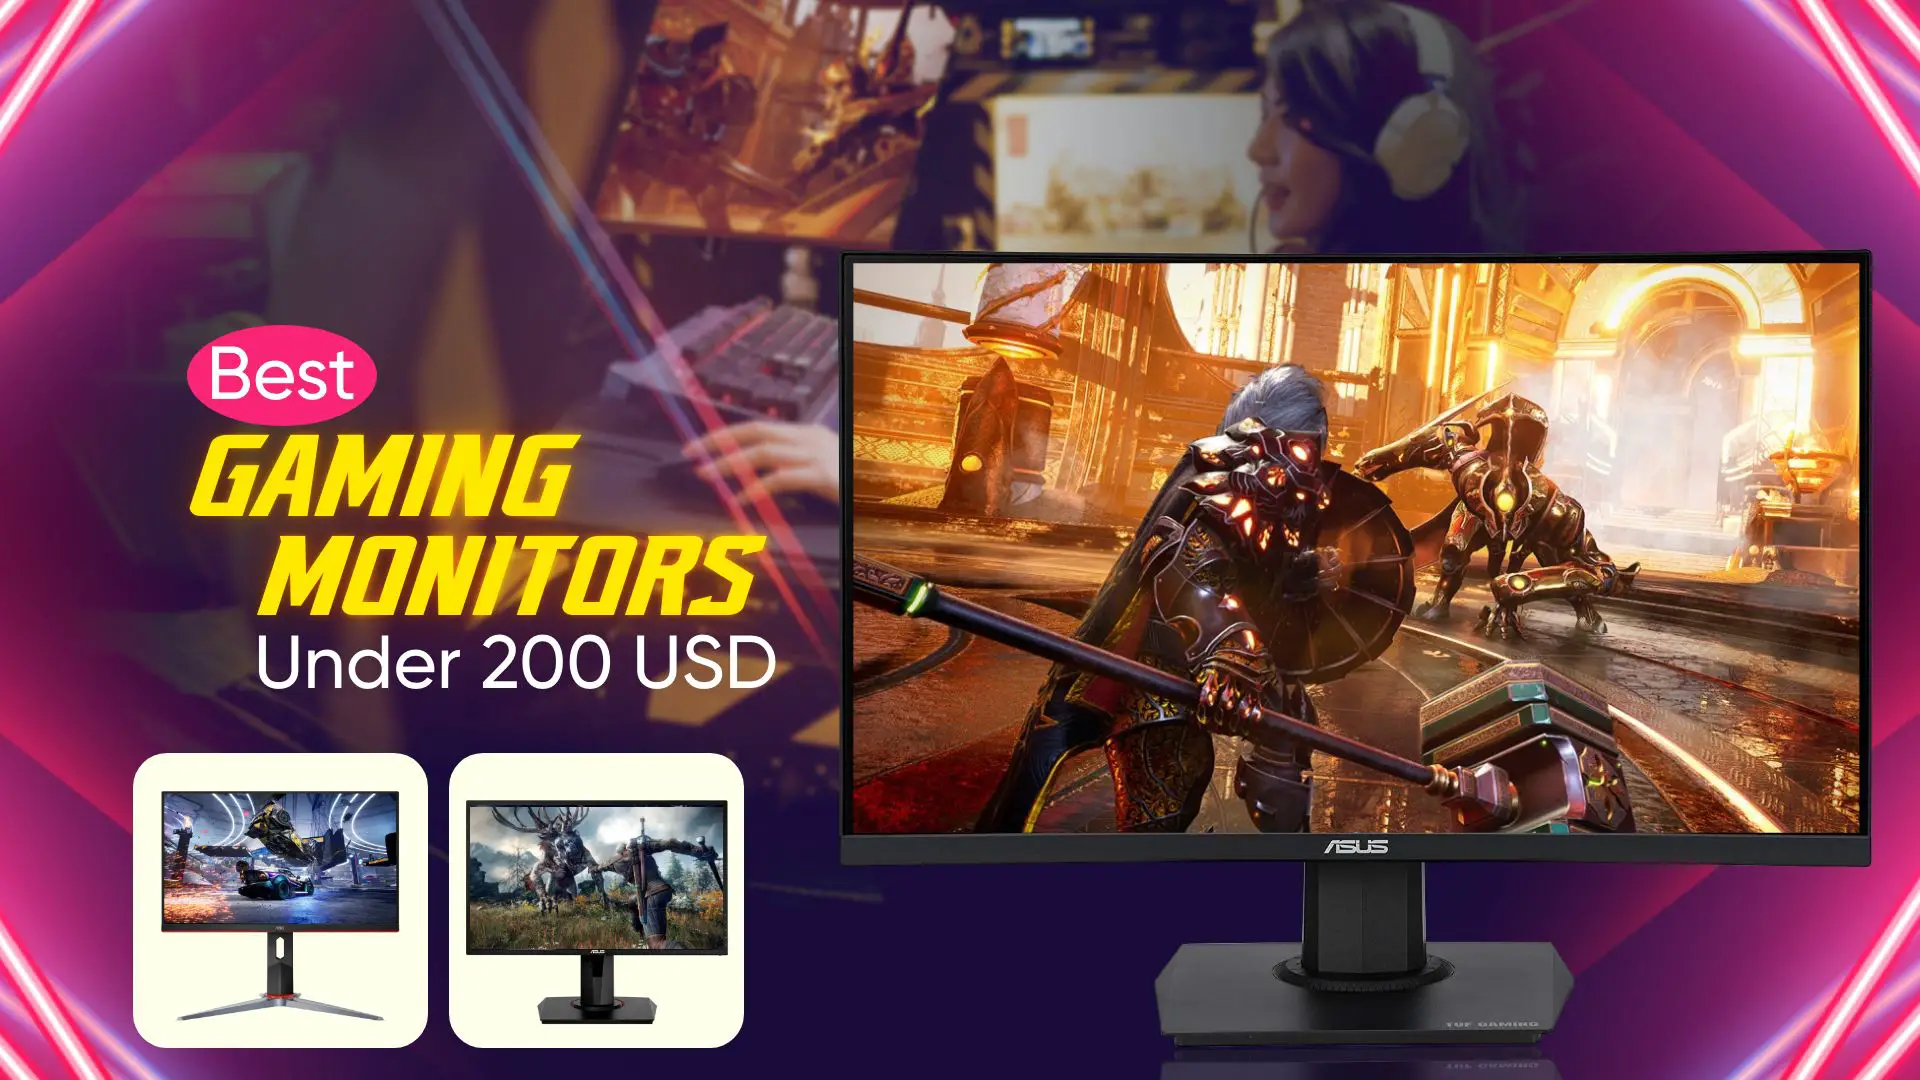 7 Best Gaming Monitors Under 200 USD in 2023